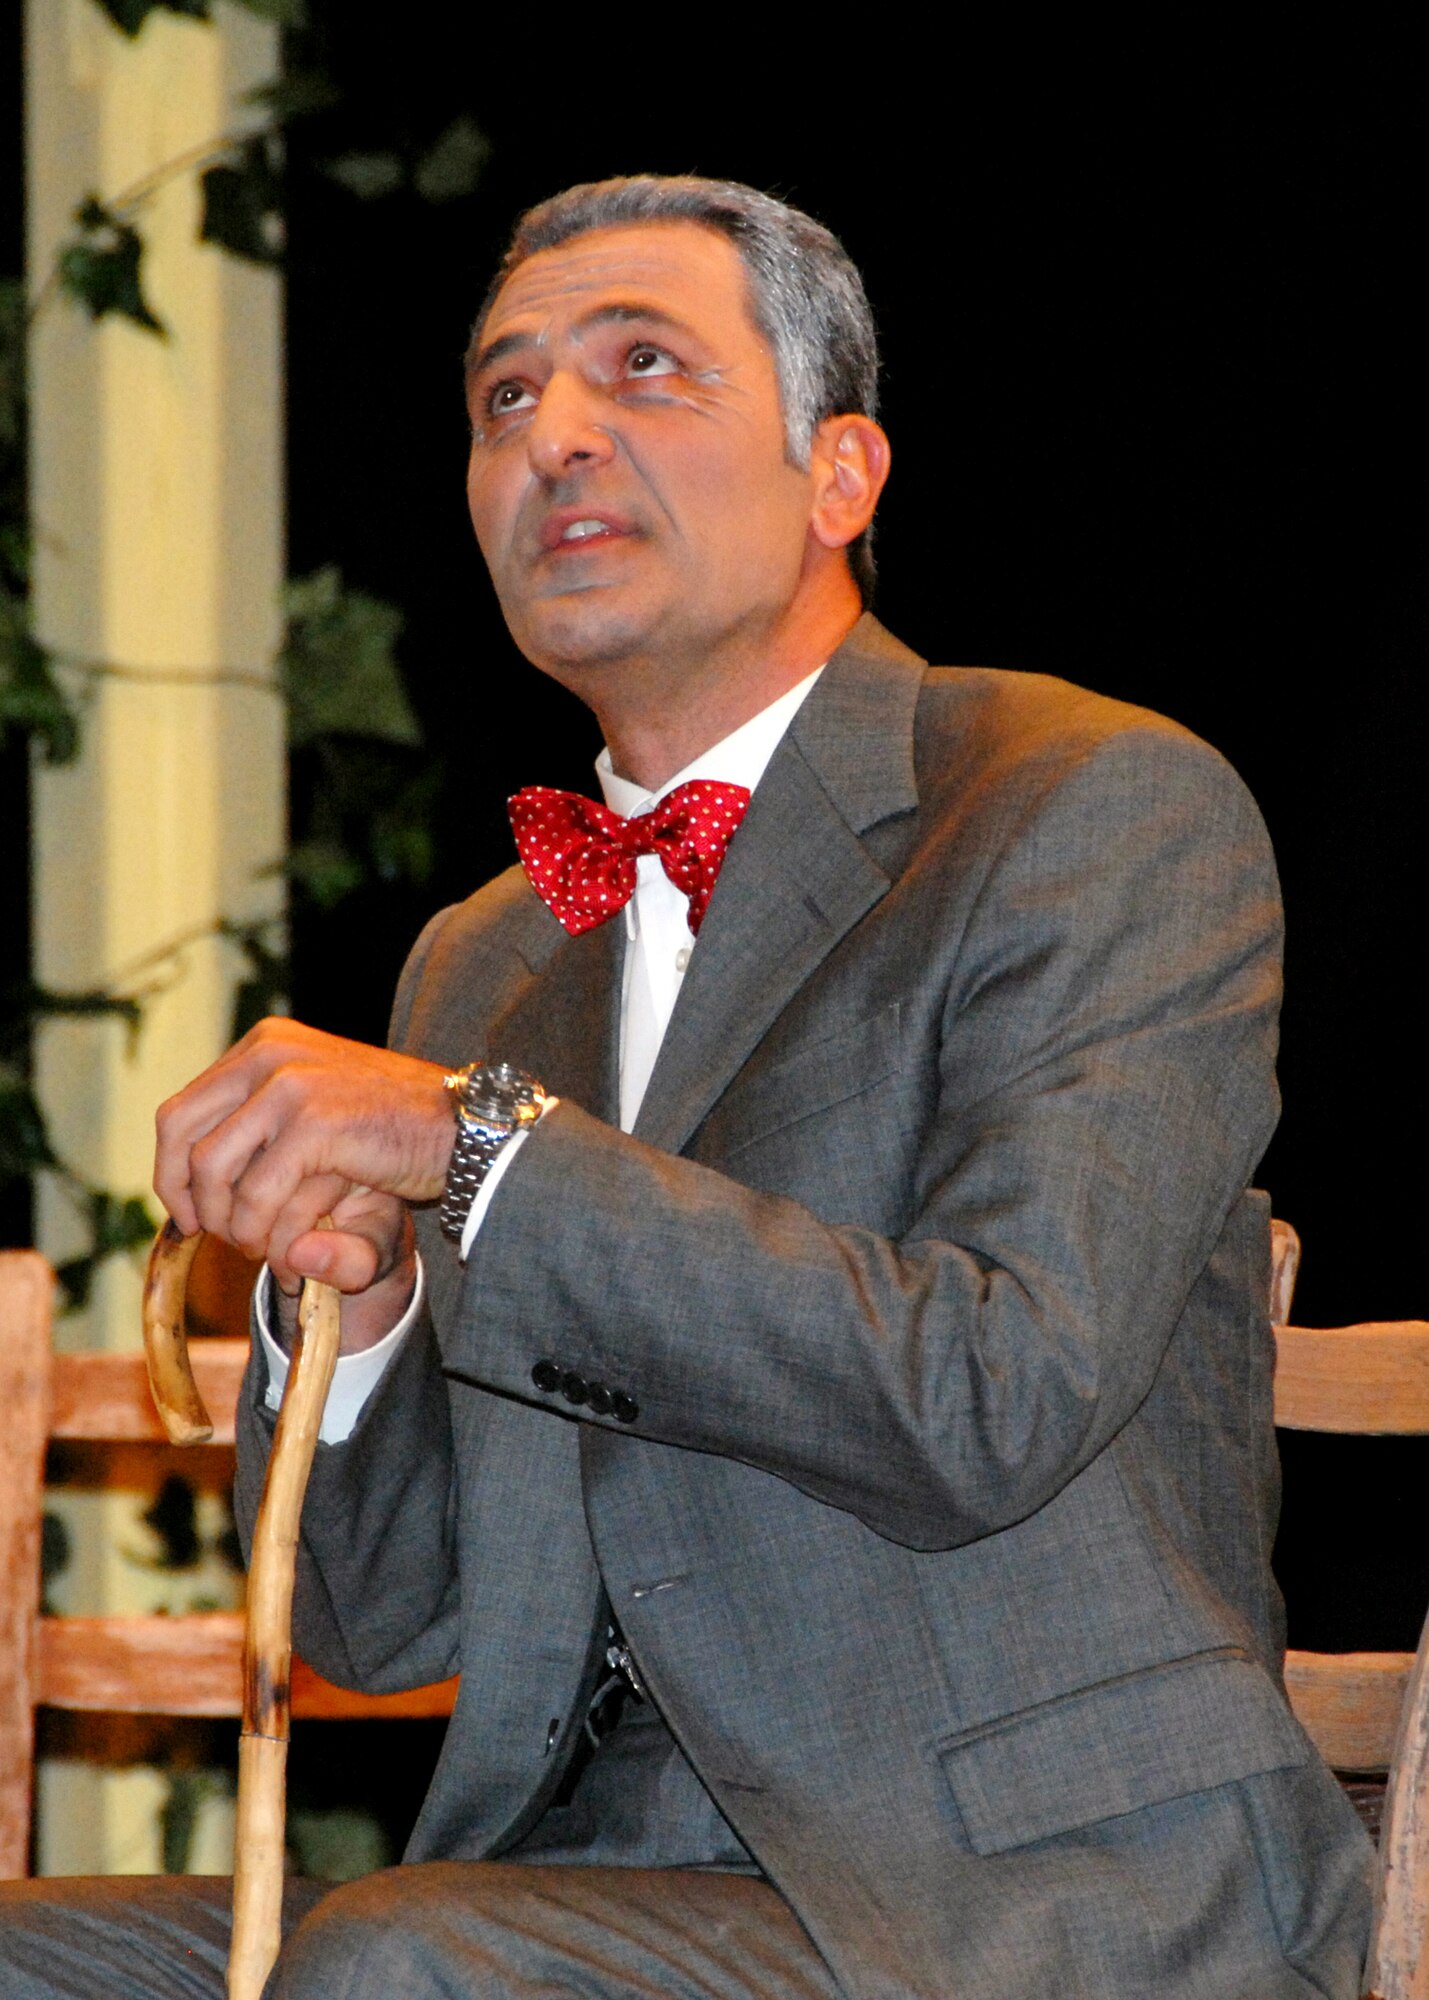 Dr. Scott, played by Italian air force Lt. Col. Davide Re, speaks about the mystery of Cliff Edge, the house that is surrounded by suspicion in Tim Kelly's "The Uninvited." The ENJJPT Players performed for the audience April 16-19 at the community activities center. The acting troupe will present the proceeds of the four-day play to local charities. (U.S. Air Force photo/Mike Litteken)